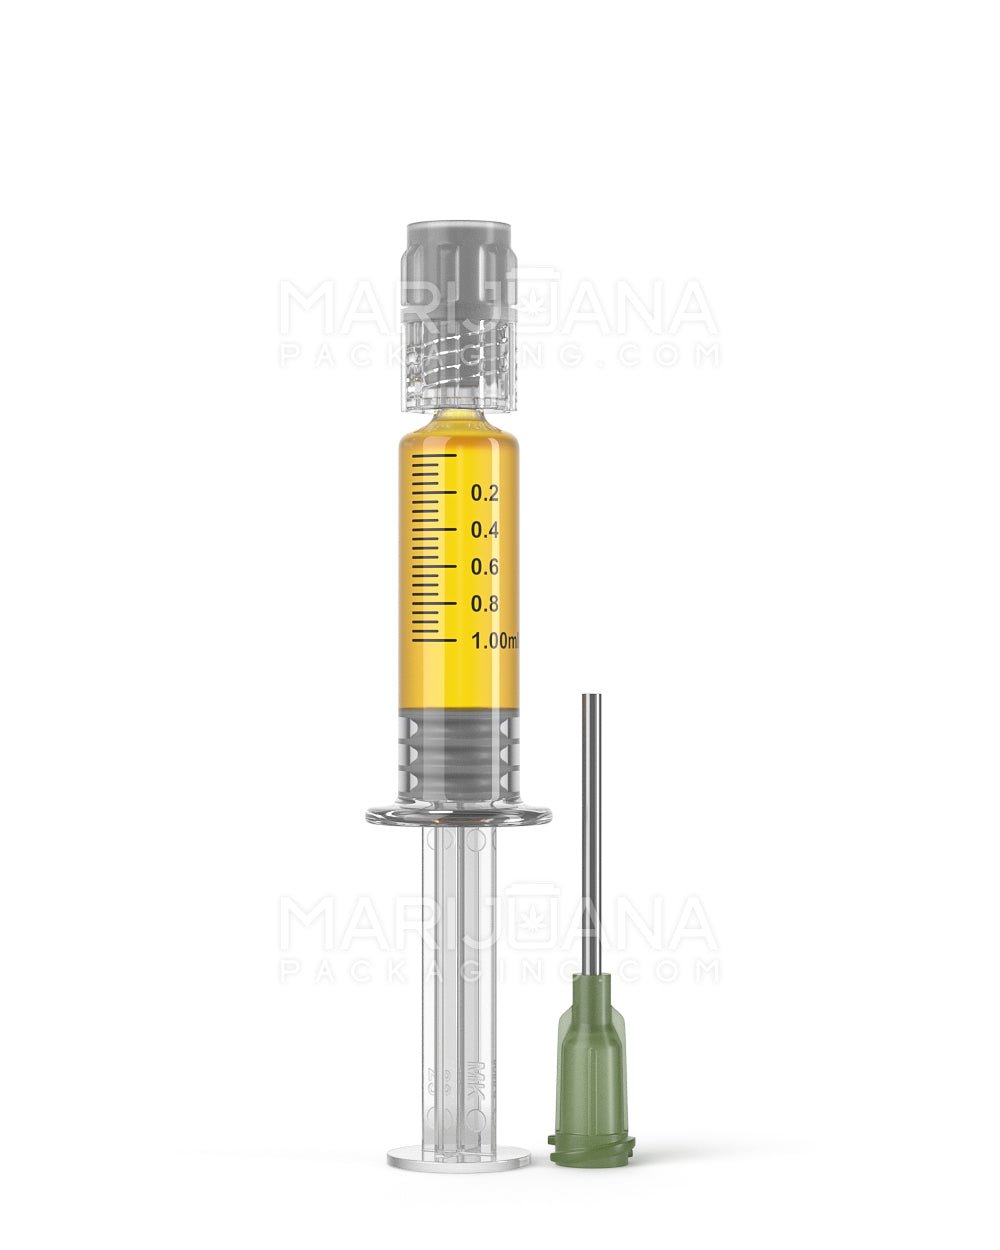 Luer Lock | Glass Dab Applicator Syringes w/ Needle Tip | 1mL - 0.2mL Increments - 100 Count - 2